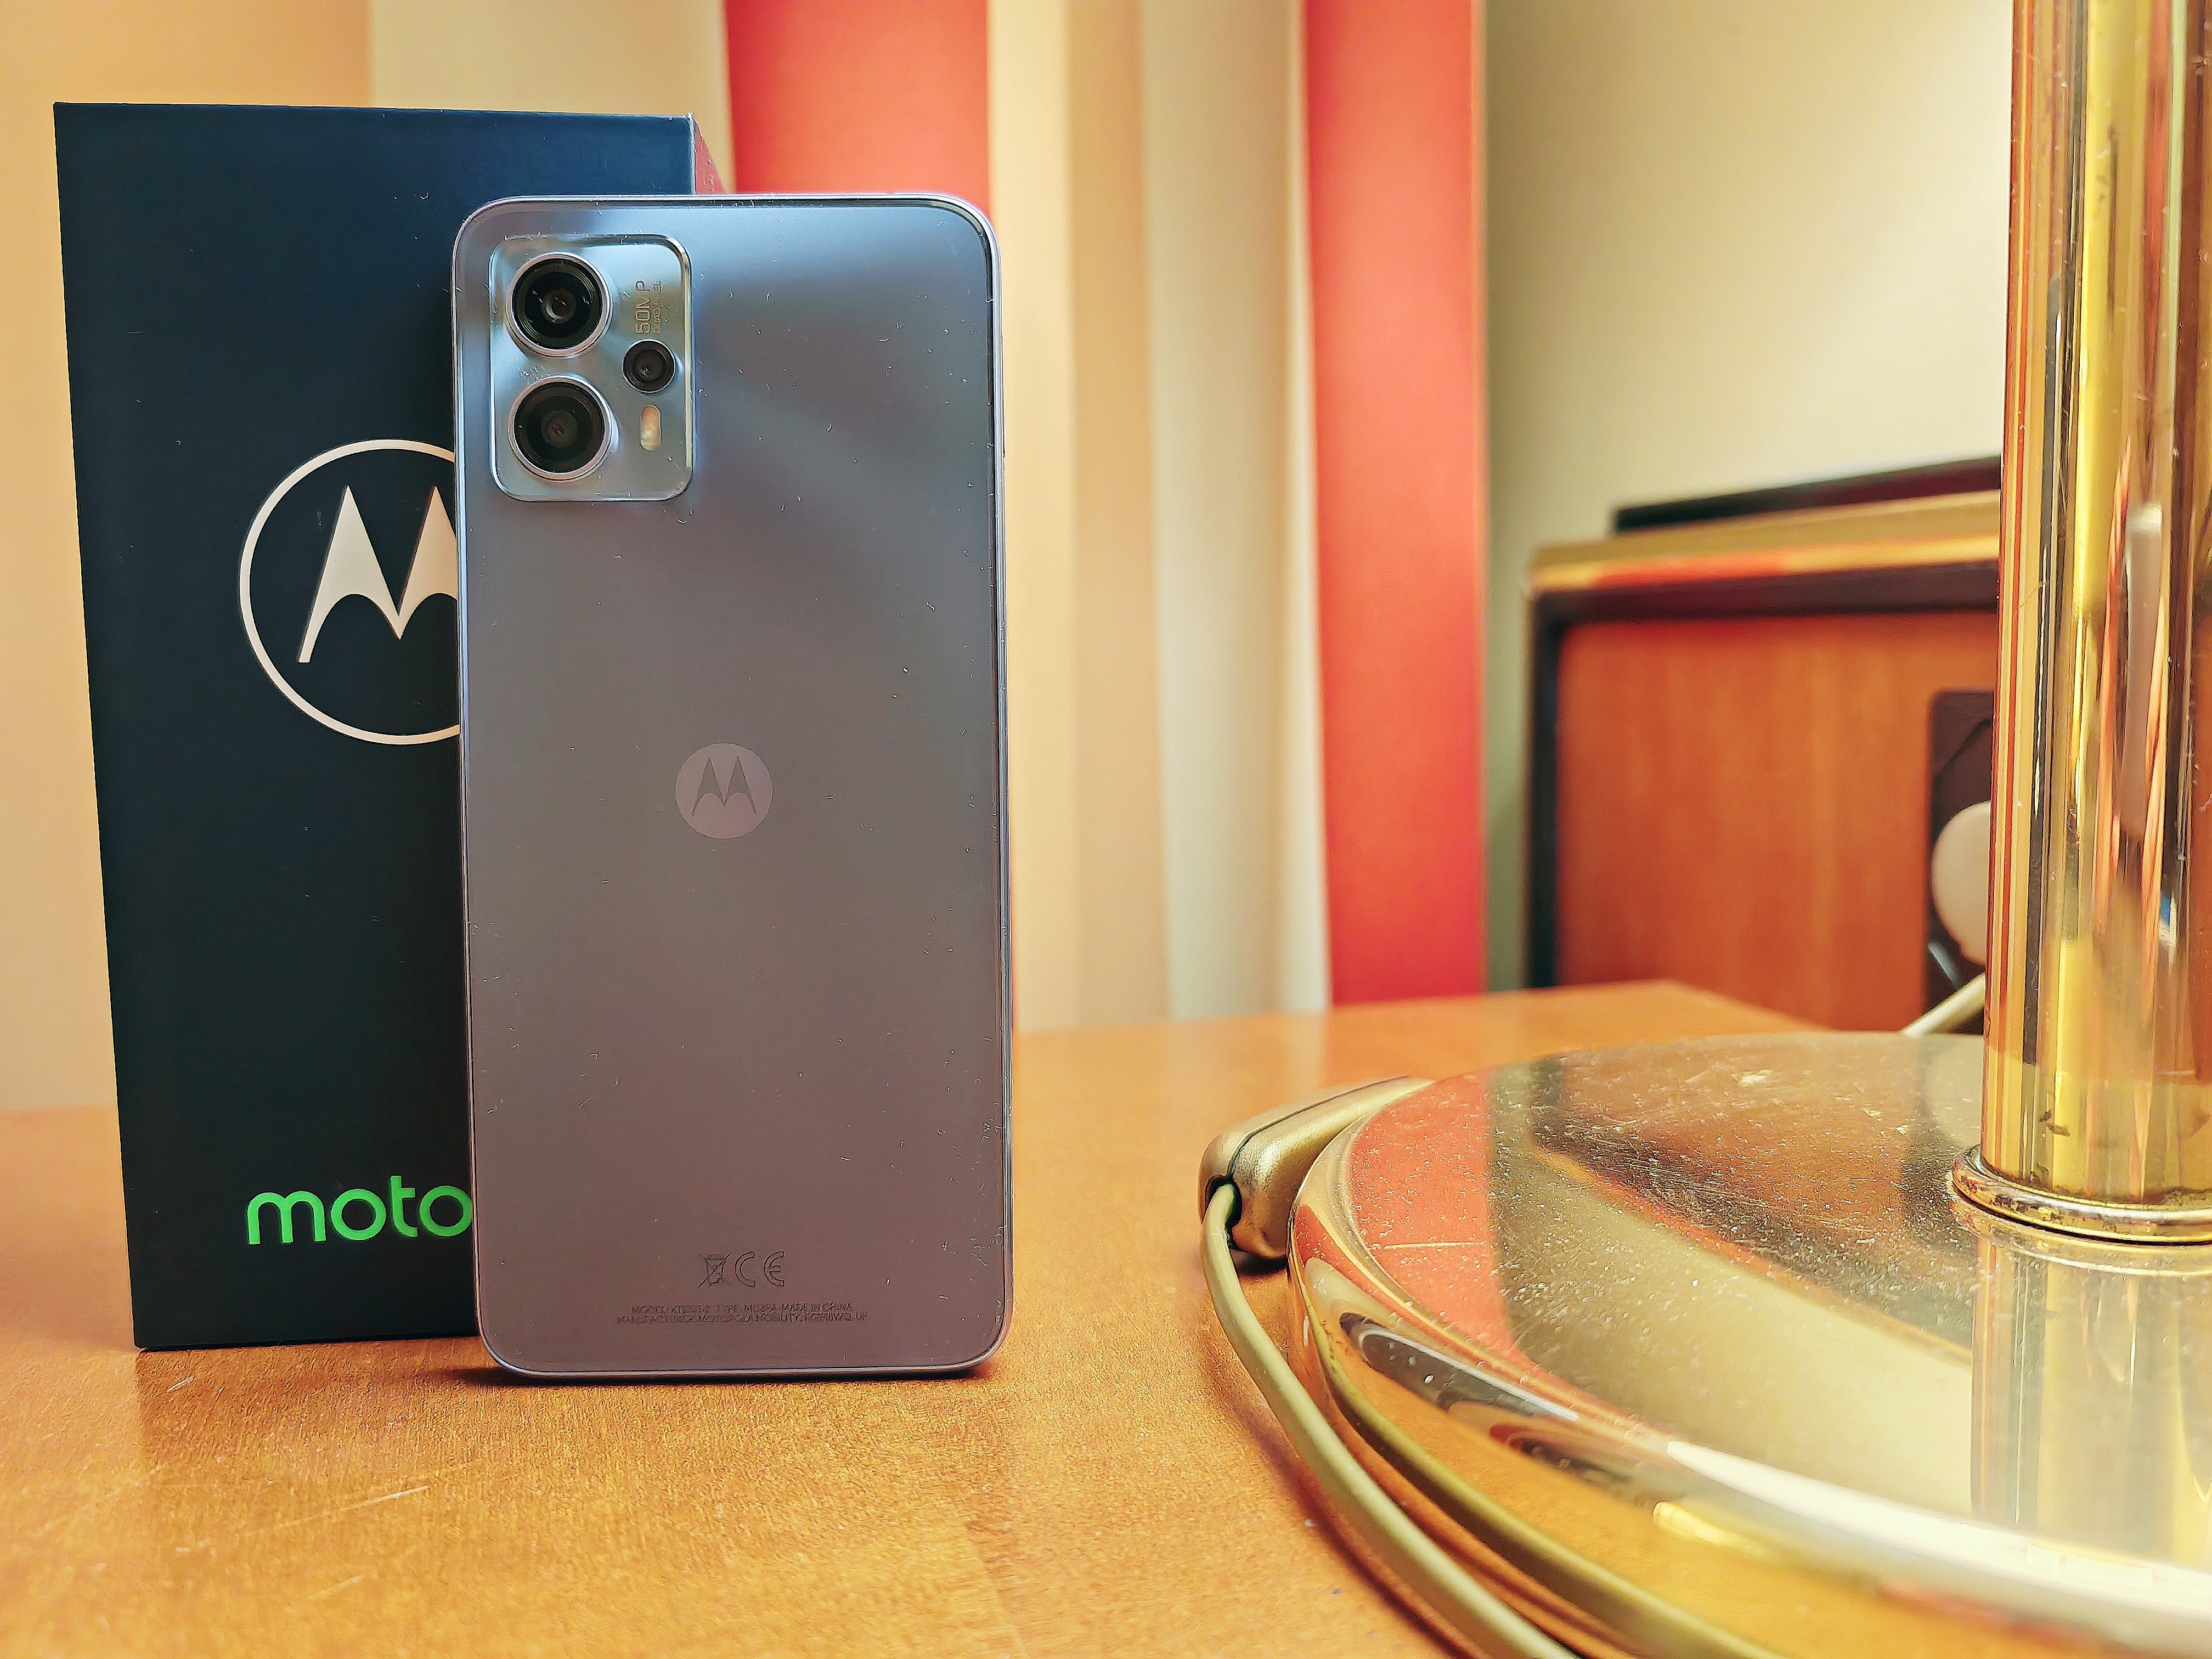 Motorola Moto G13 review - Affordable smartphone with NFC